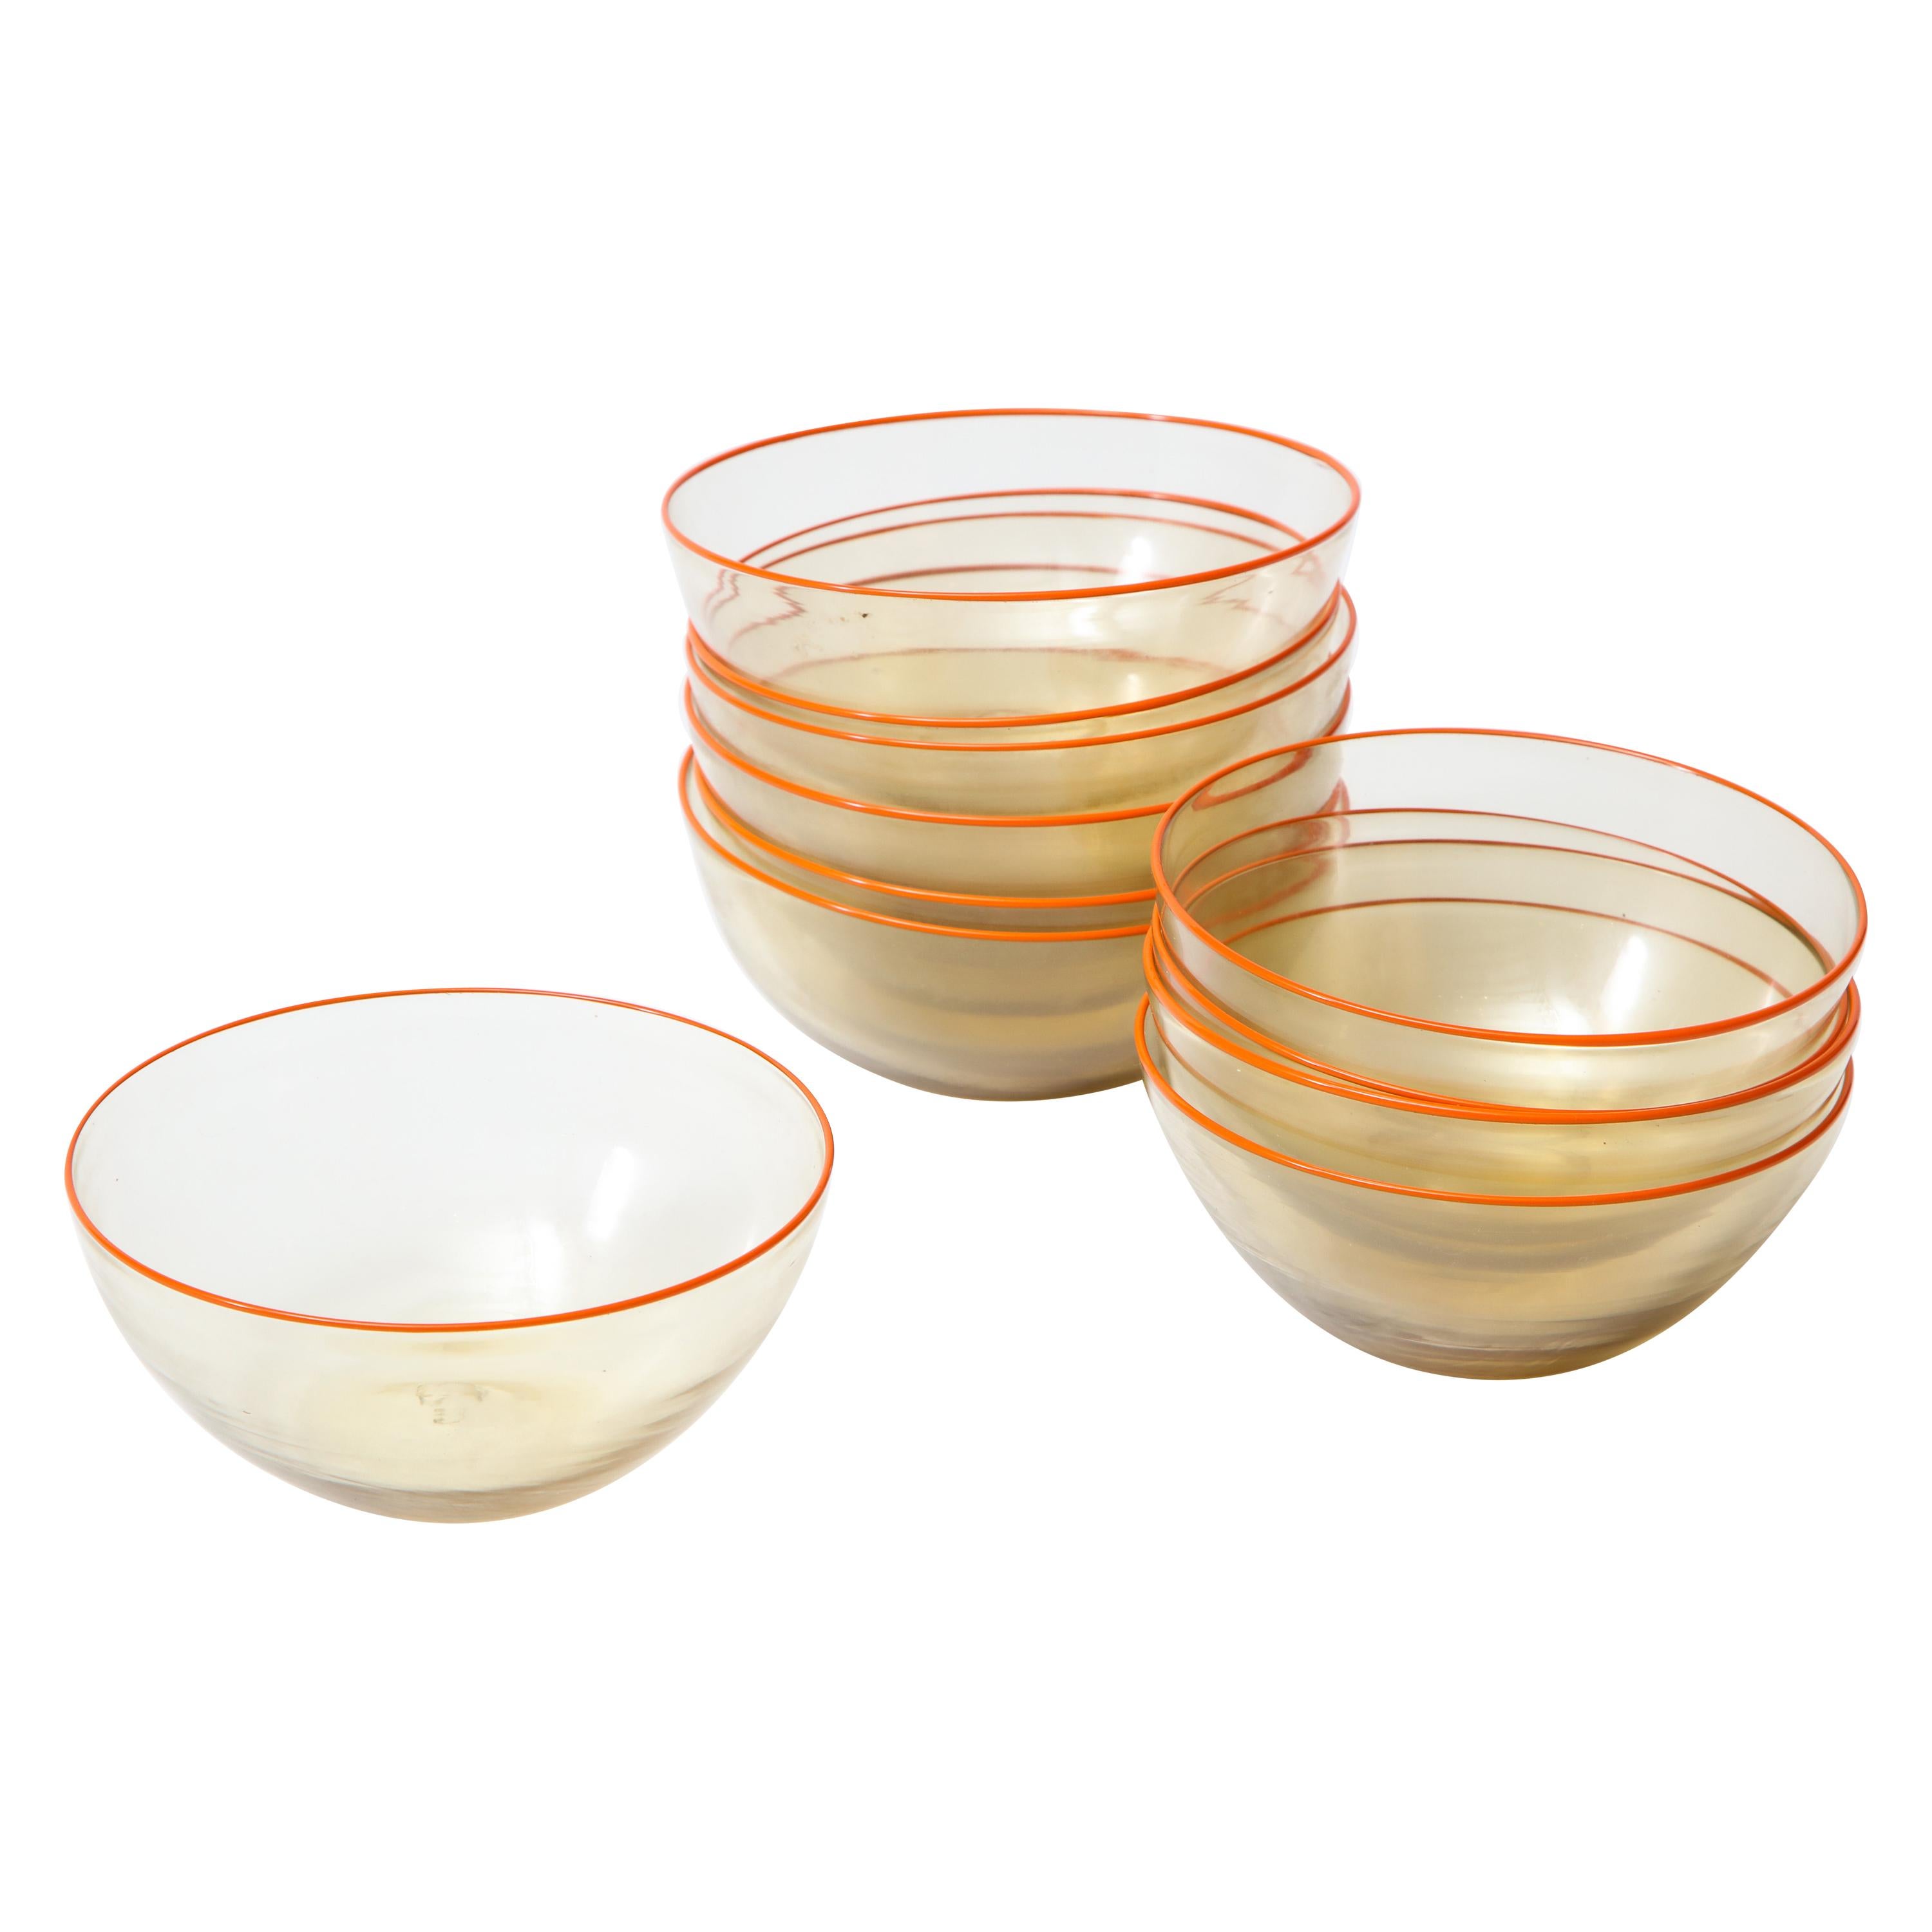 1940s Murano Clear Glass Bowls with Orange Rim, Set of 11